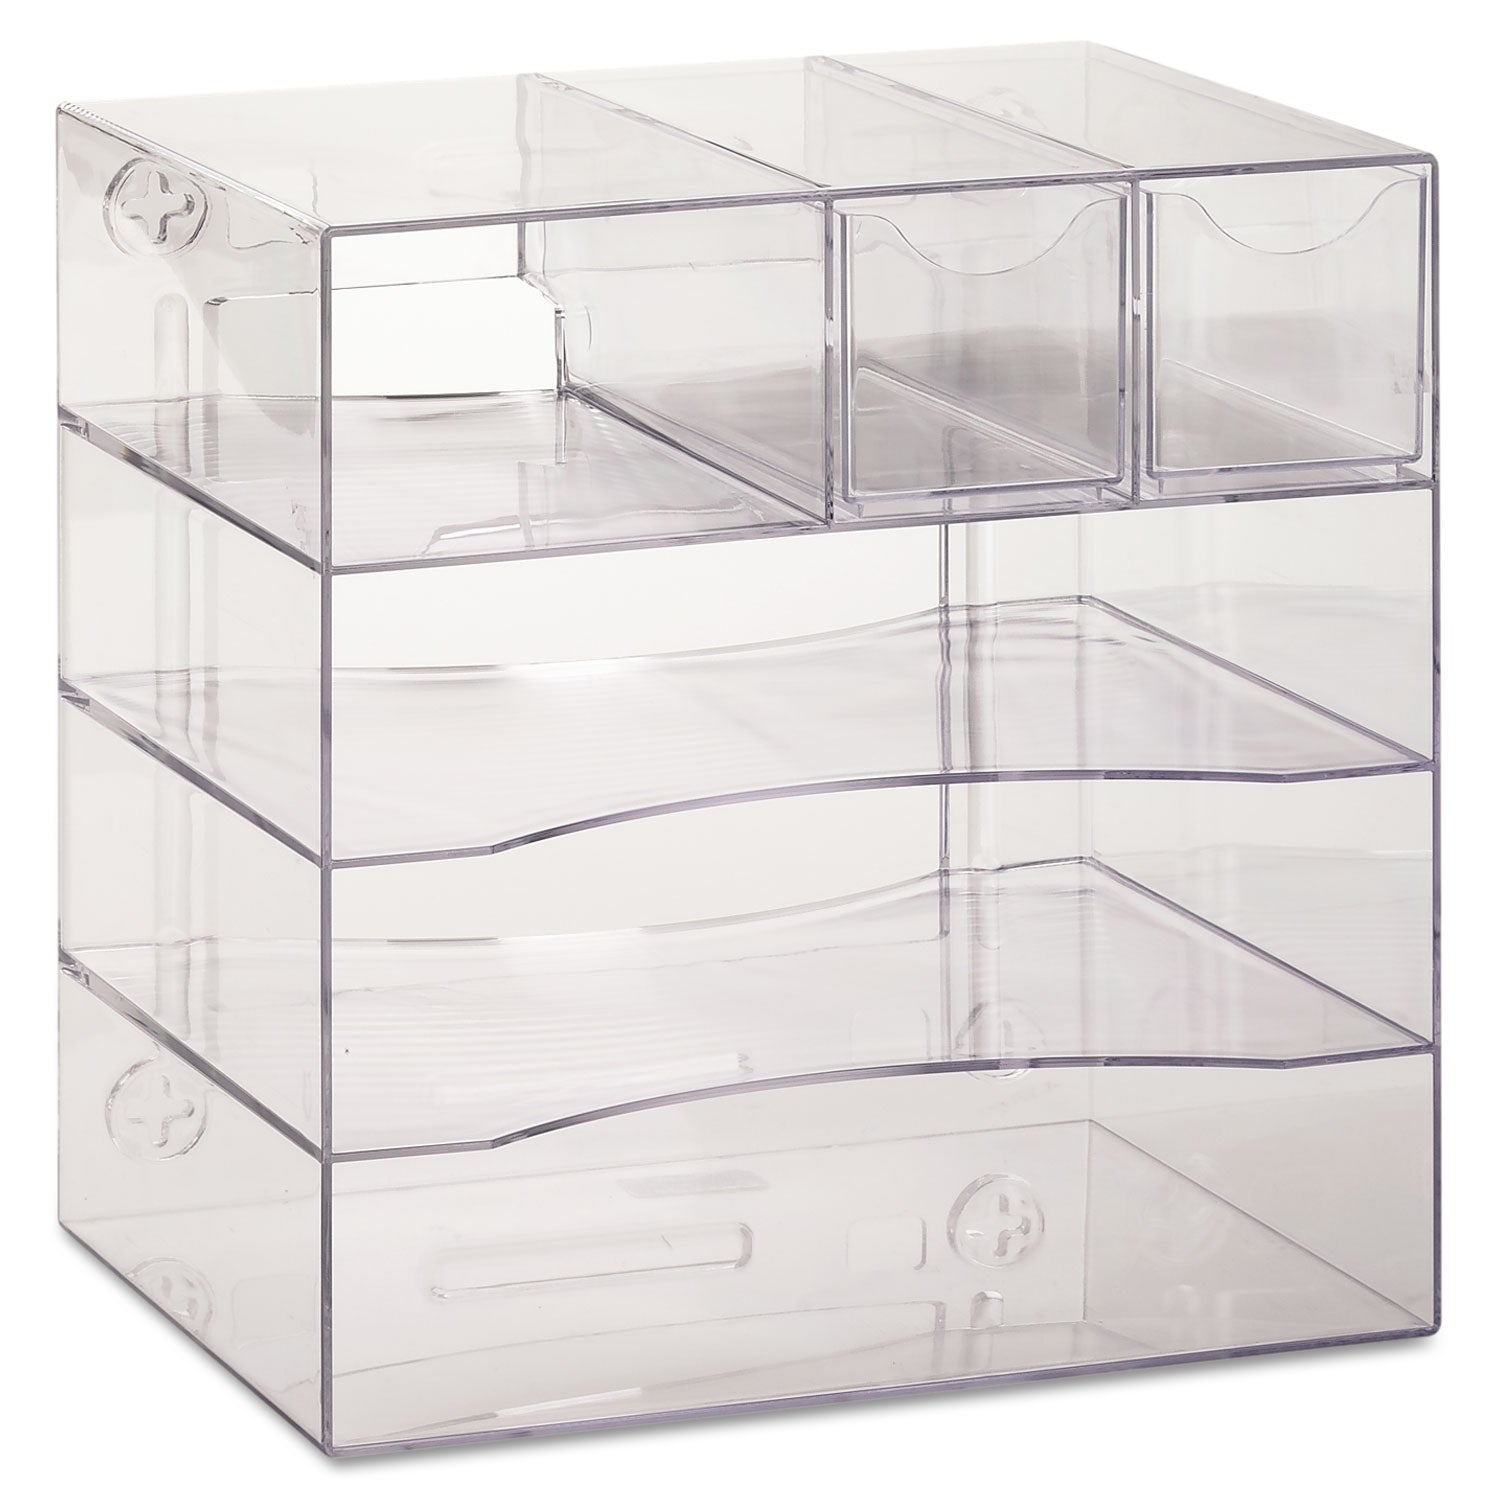 Optimizers Four-Way Organizer with Drawers, 6 Compartments, 2 Drawers, Plastic, 10 x 13.25 x 13.25, Clear - 